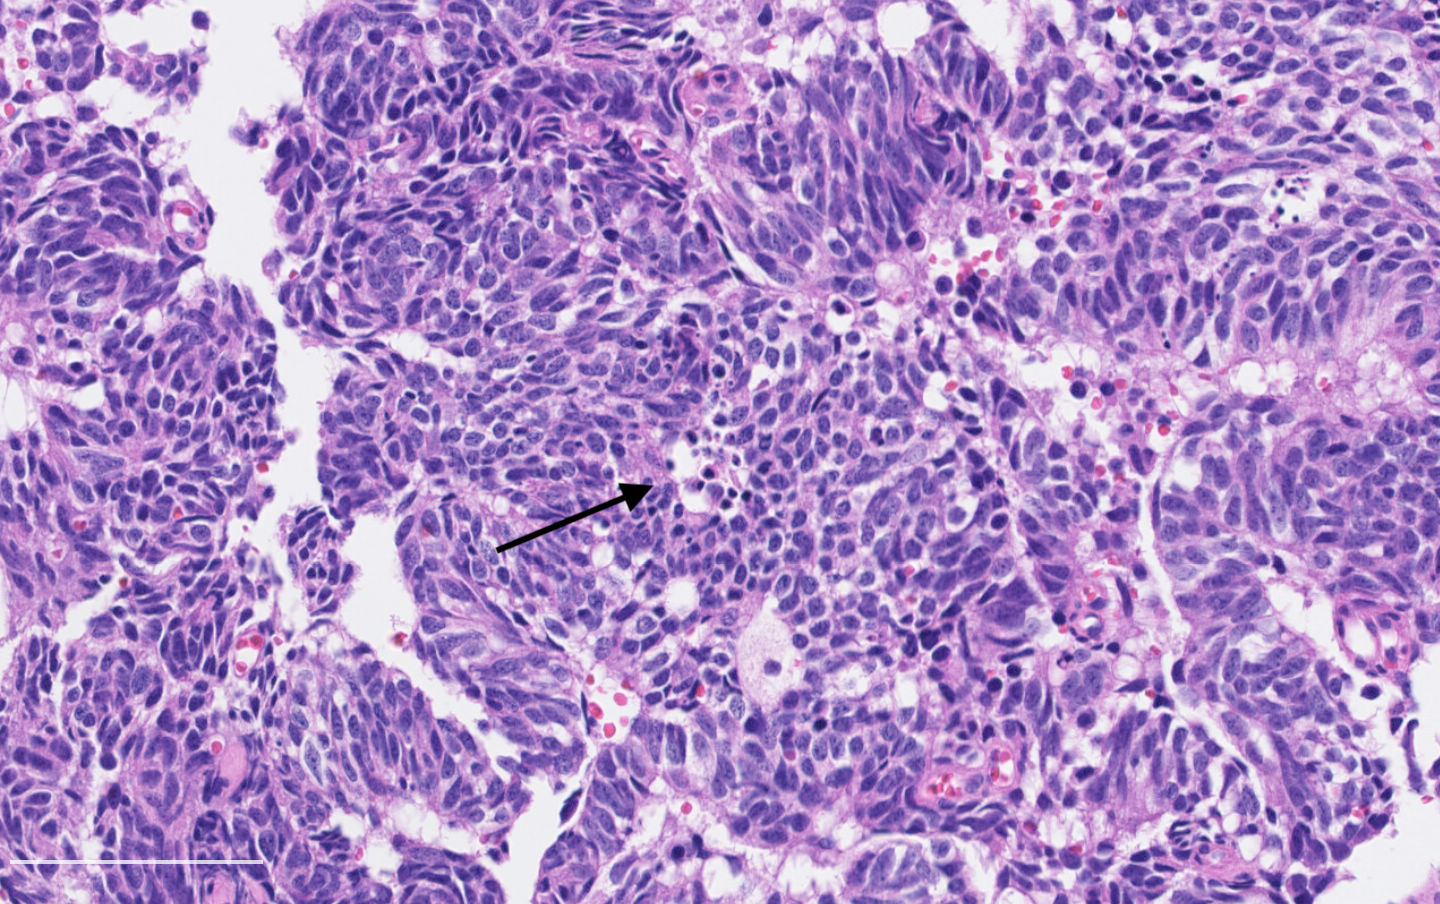 Atypical carcinoid